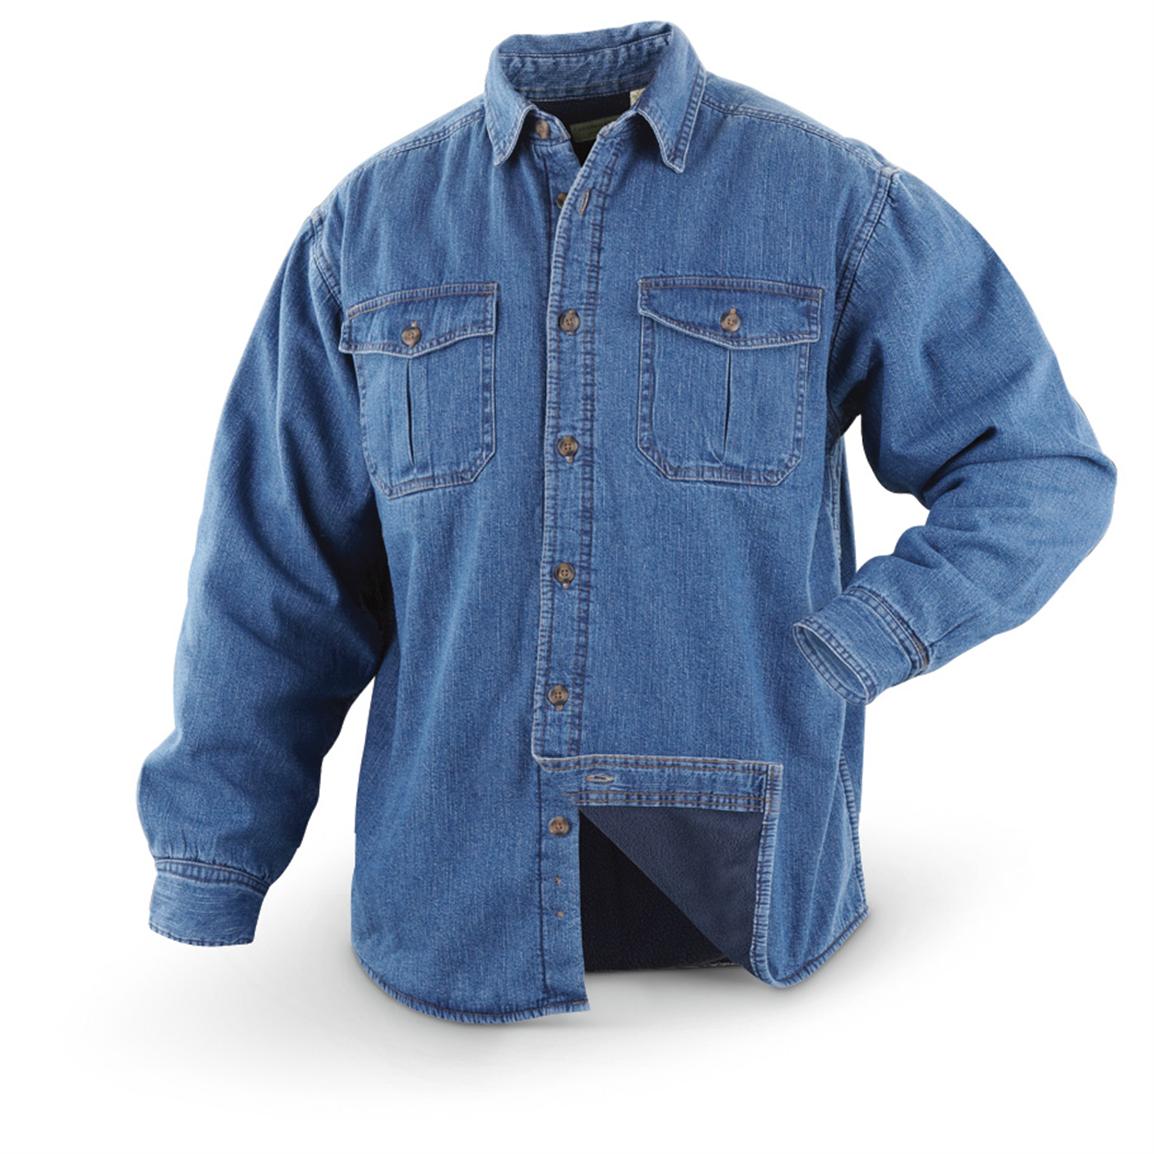 Rugged Earth Fleece-lined Denim Shirt - 589011, Shirts at Sportsman's Guide